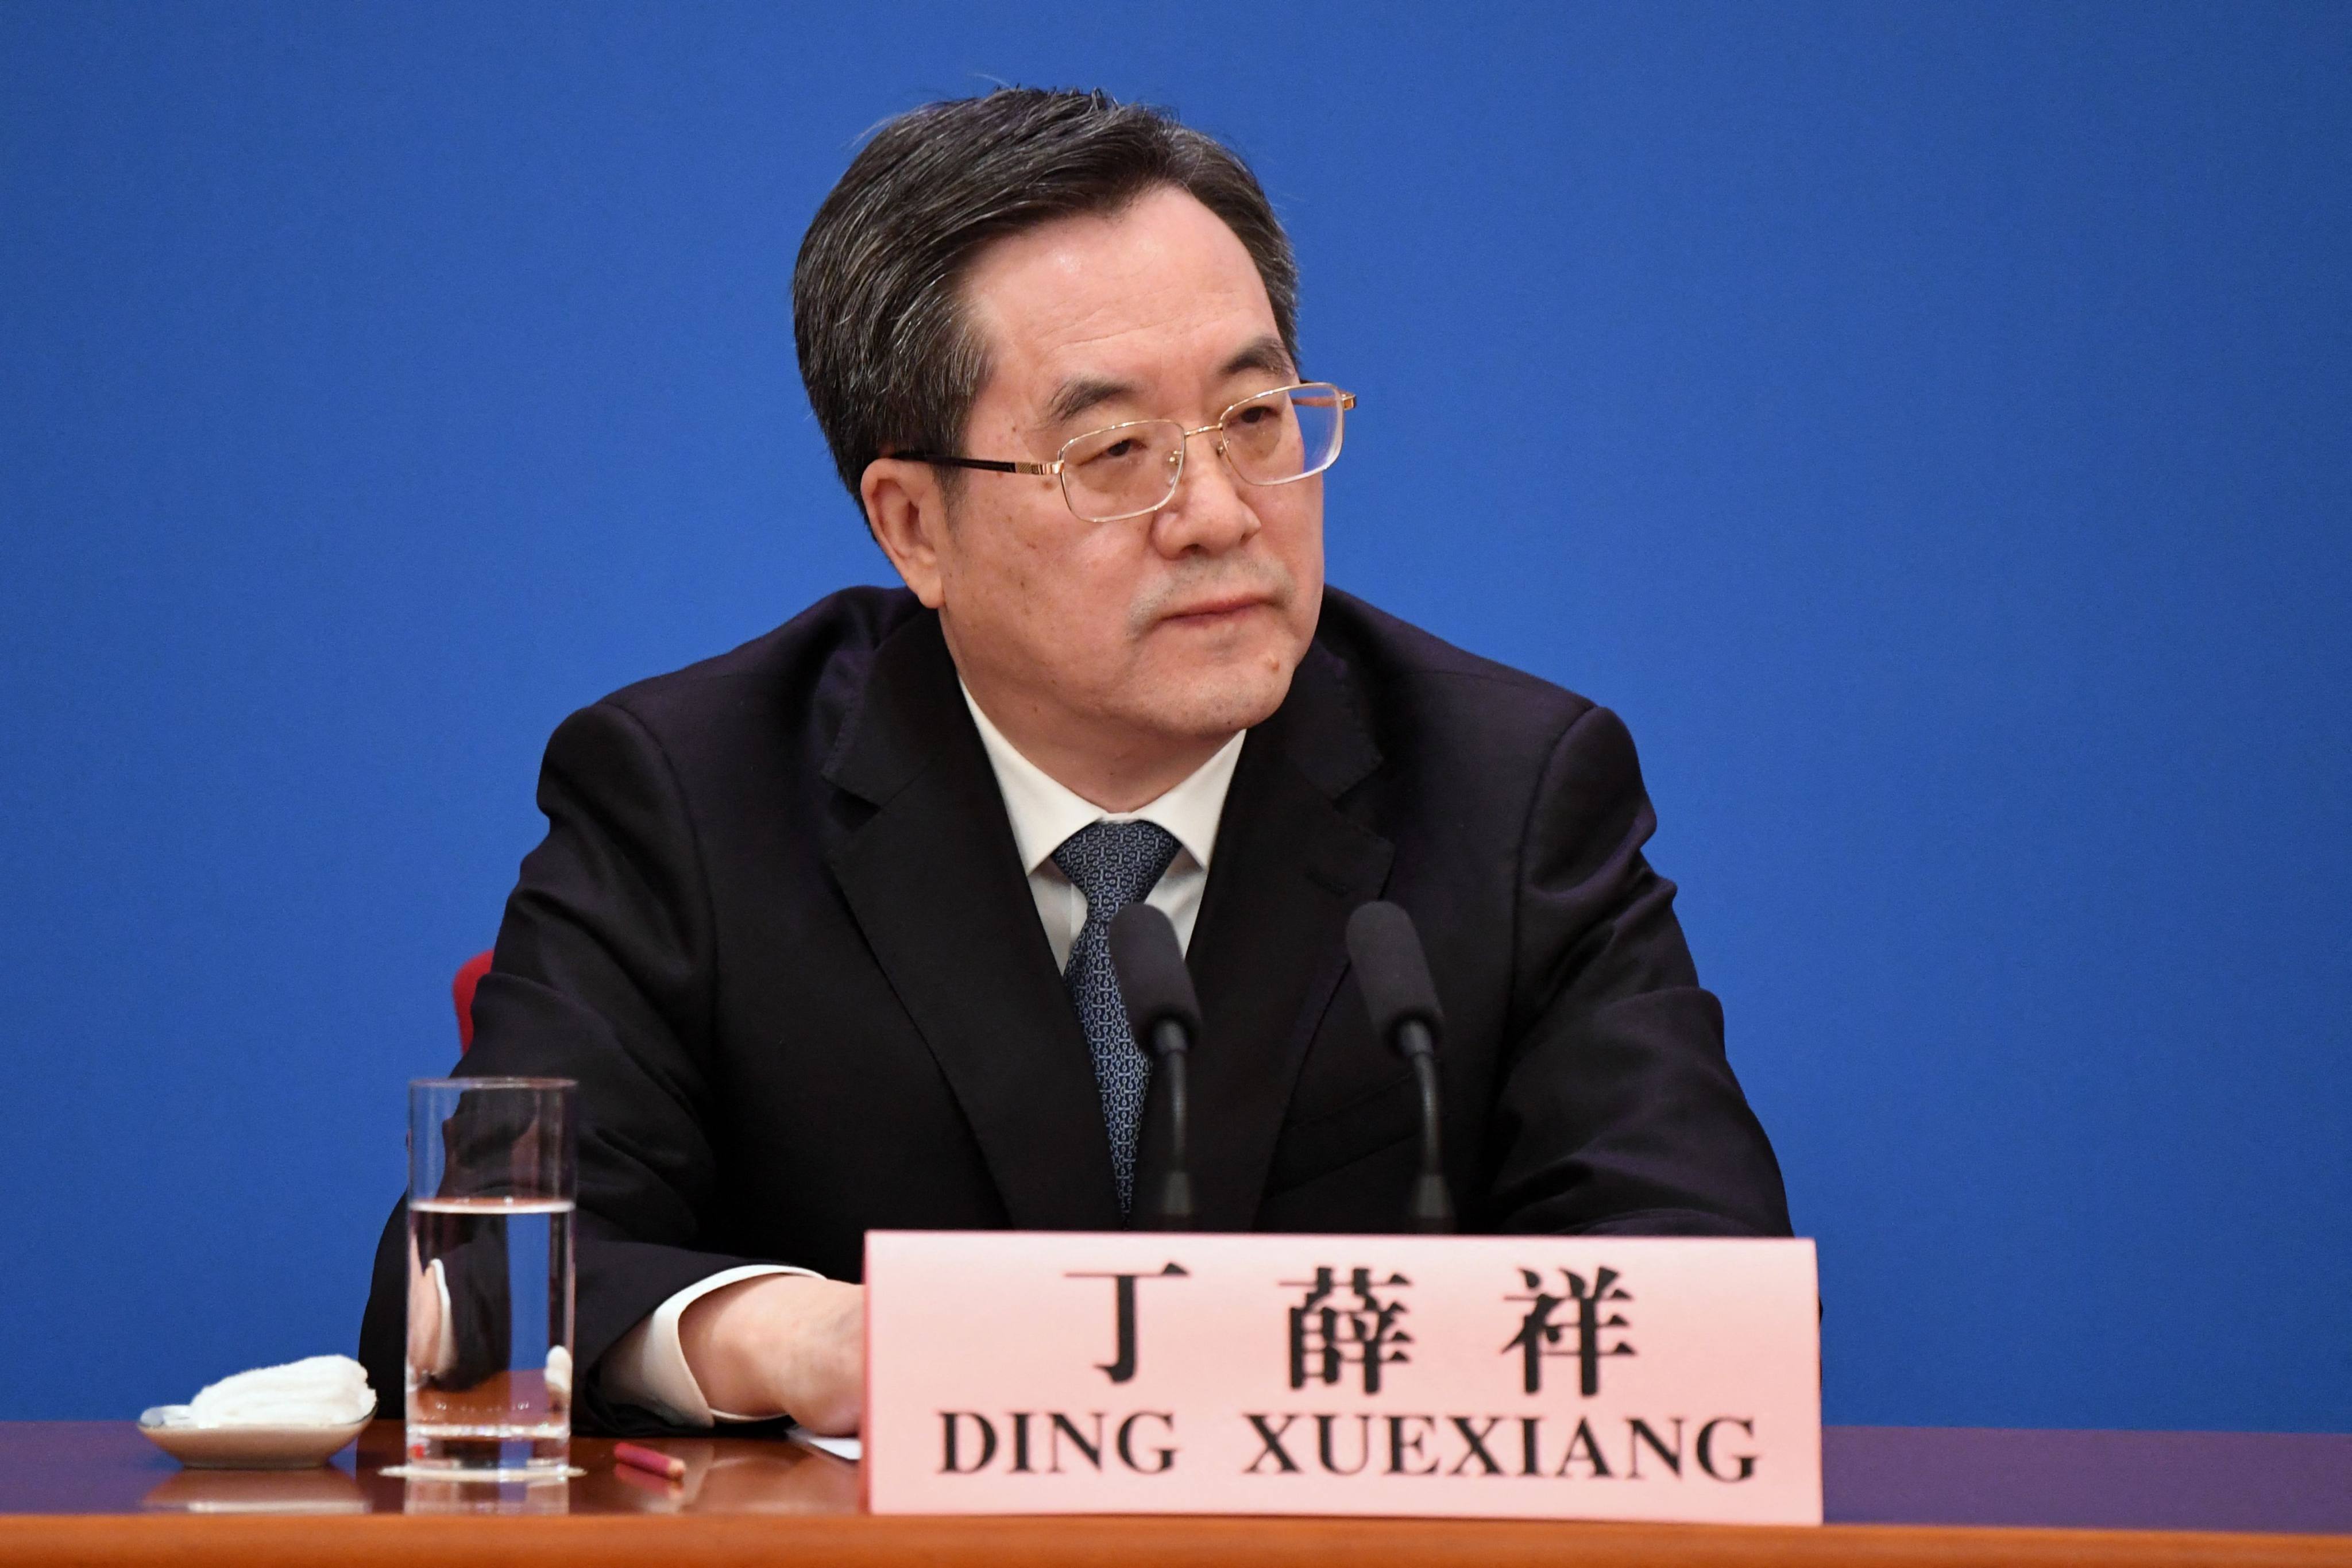 Ding Xuexiang, the country’s executive vice-premier, is expected to front the Central Leading Group on Hong Kong and Macau Works. Photo: AFP